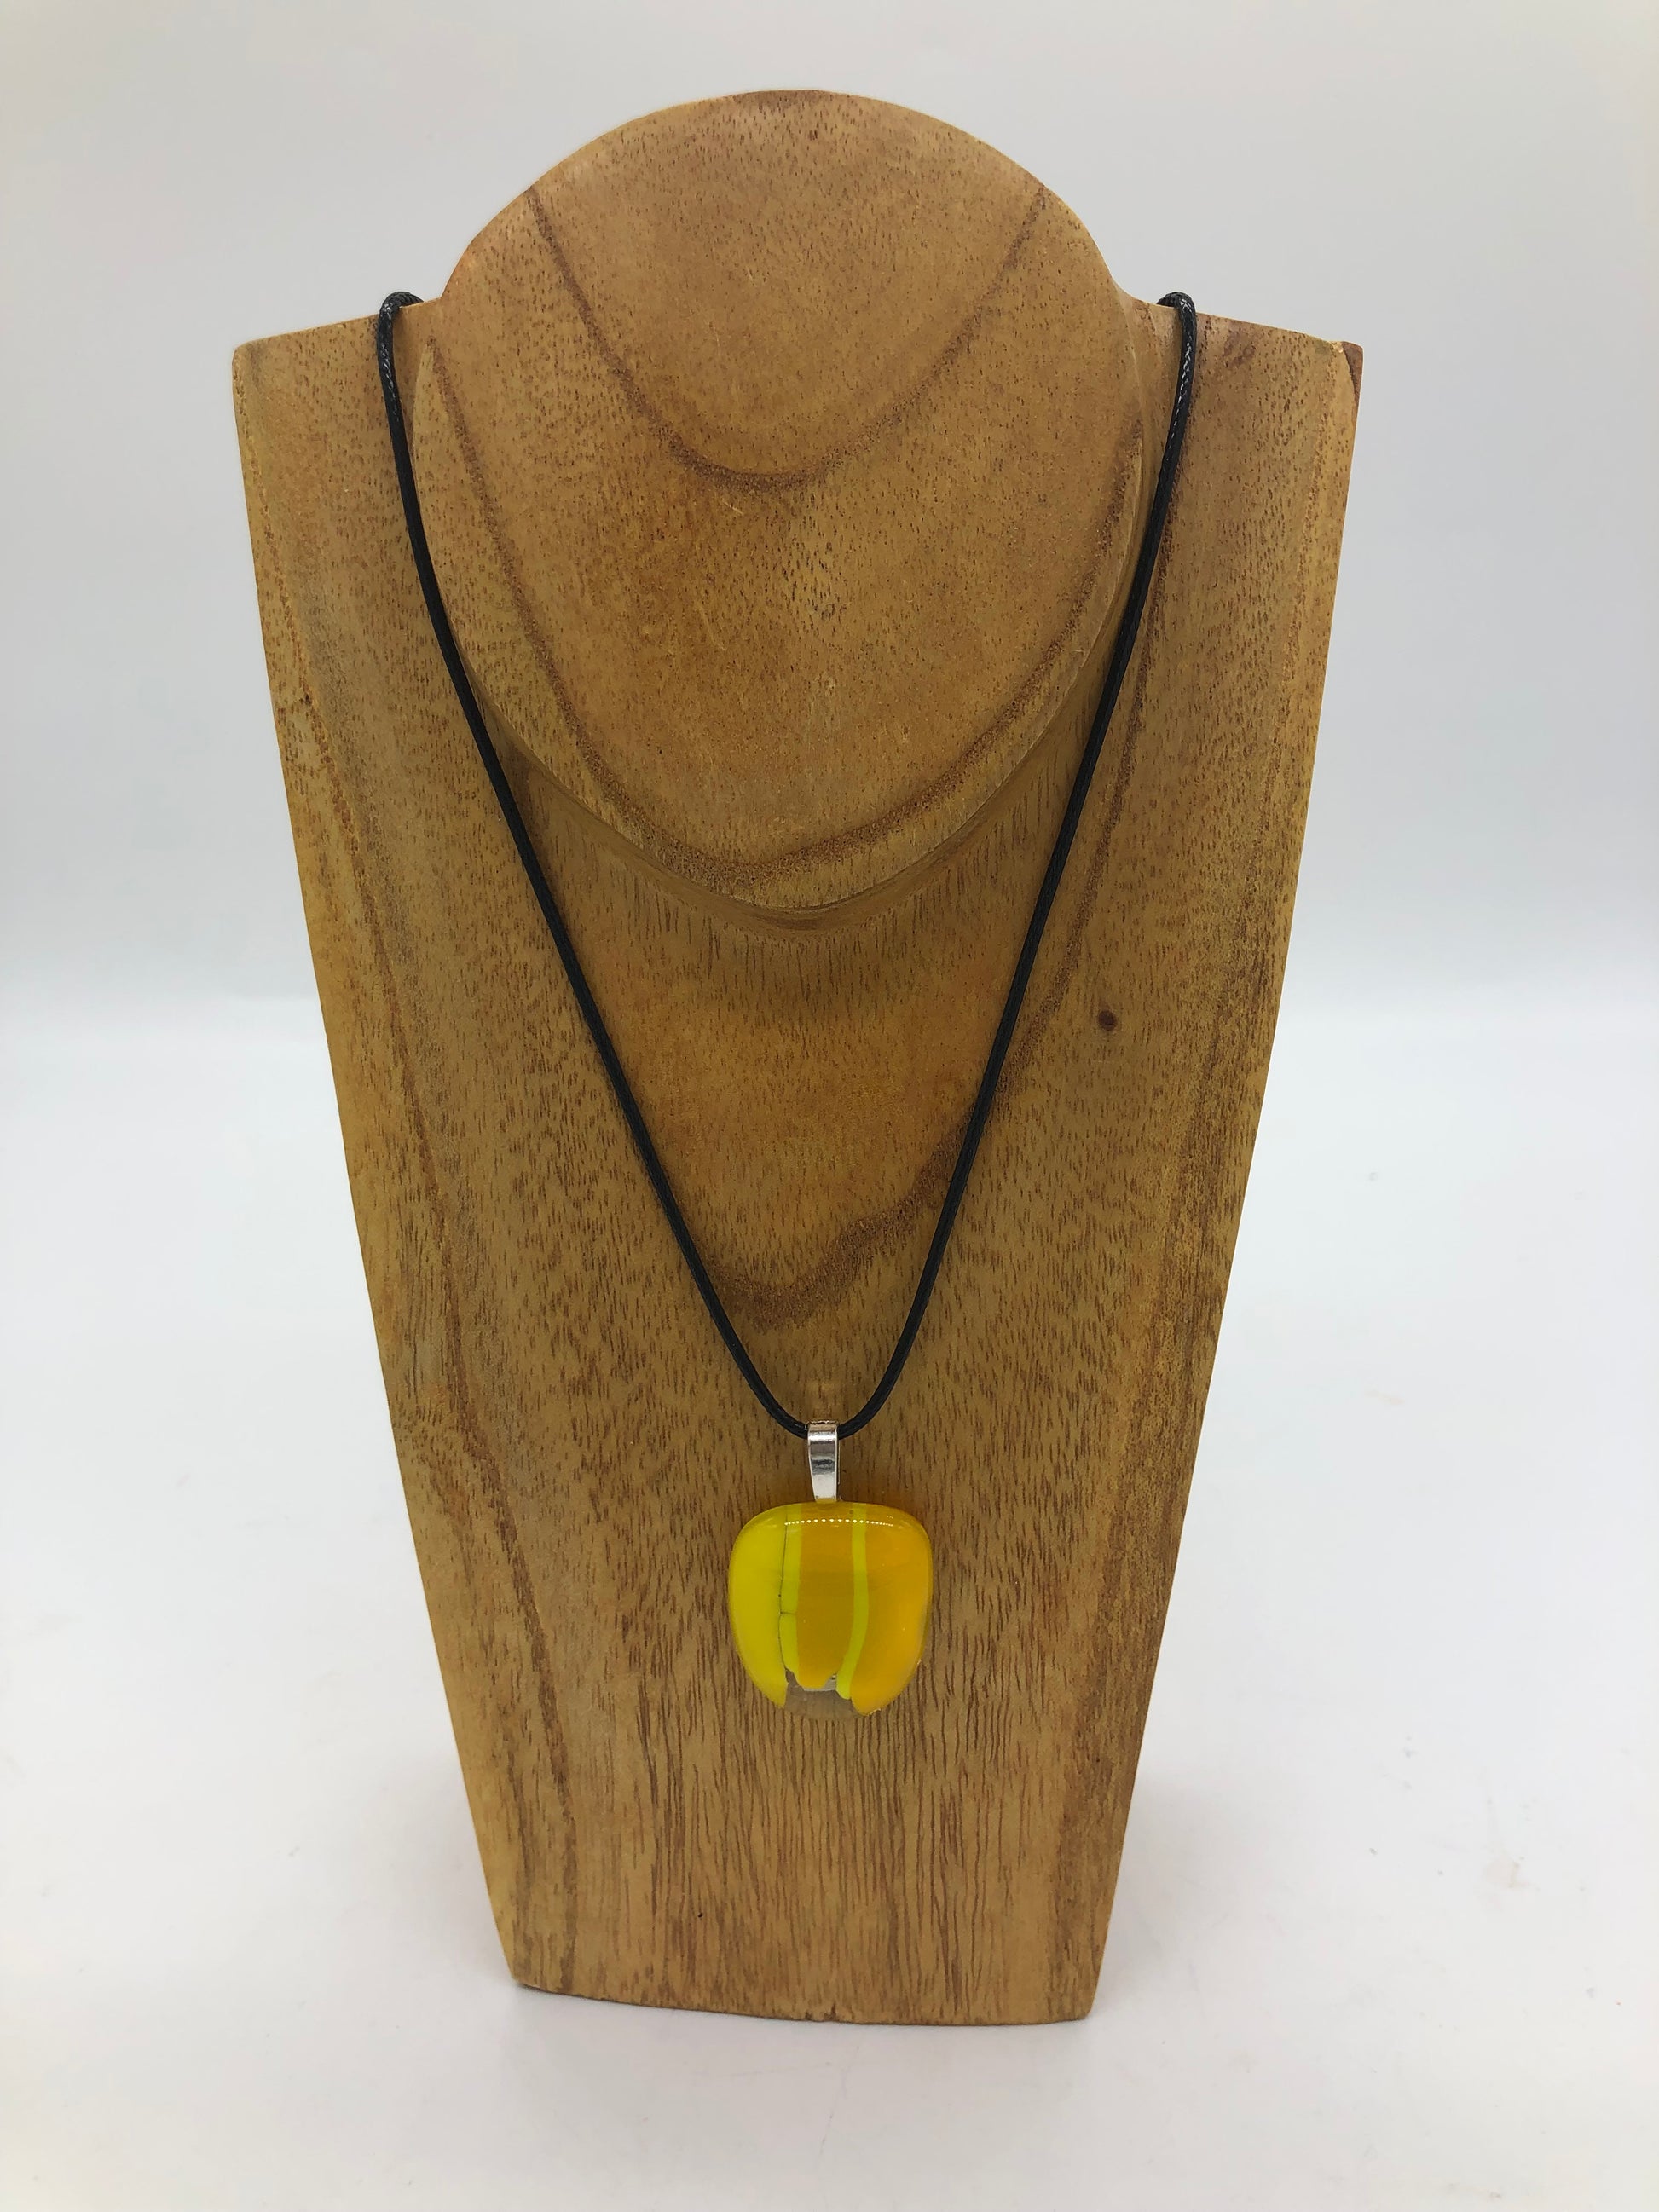 Fused glass necklace on a black cord, displayed on wooden holder.  Necklace design is a clear rounded square with two shades of yellow stripes.. 